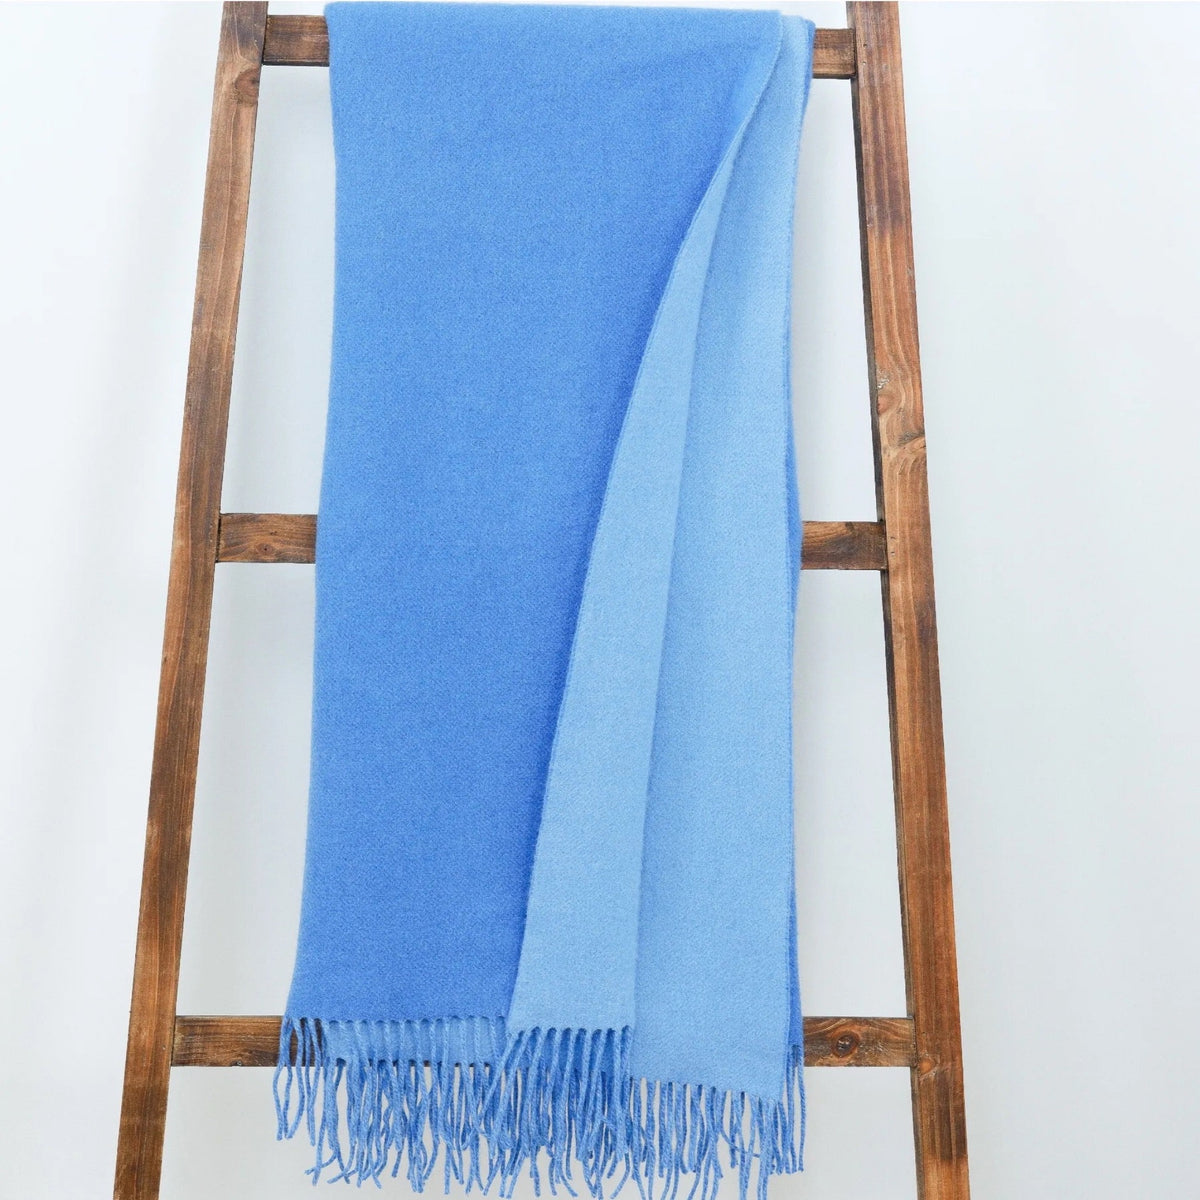 Lifestyle Image of Alashan Double Faced Classic Cashmere Blend Throw Carolina Blue/Bay Blue Color